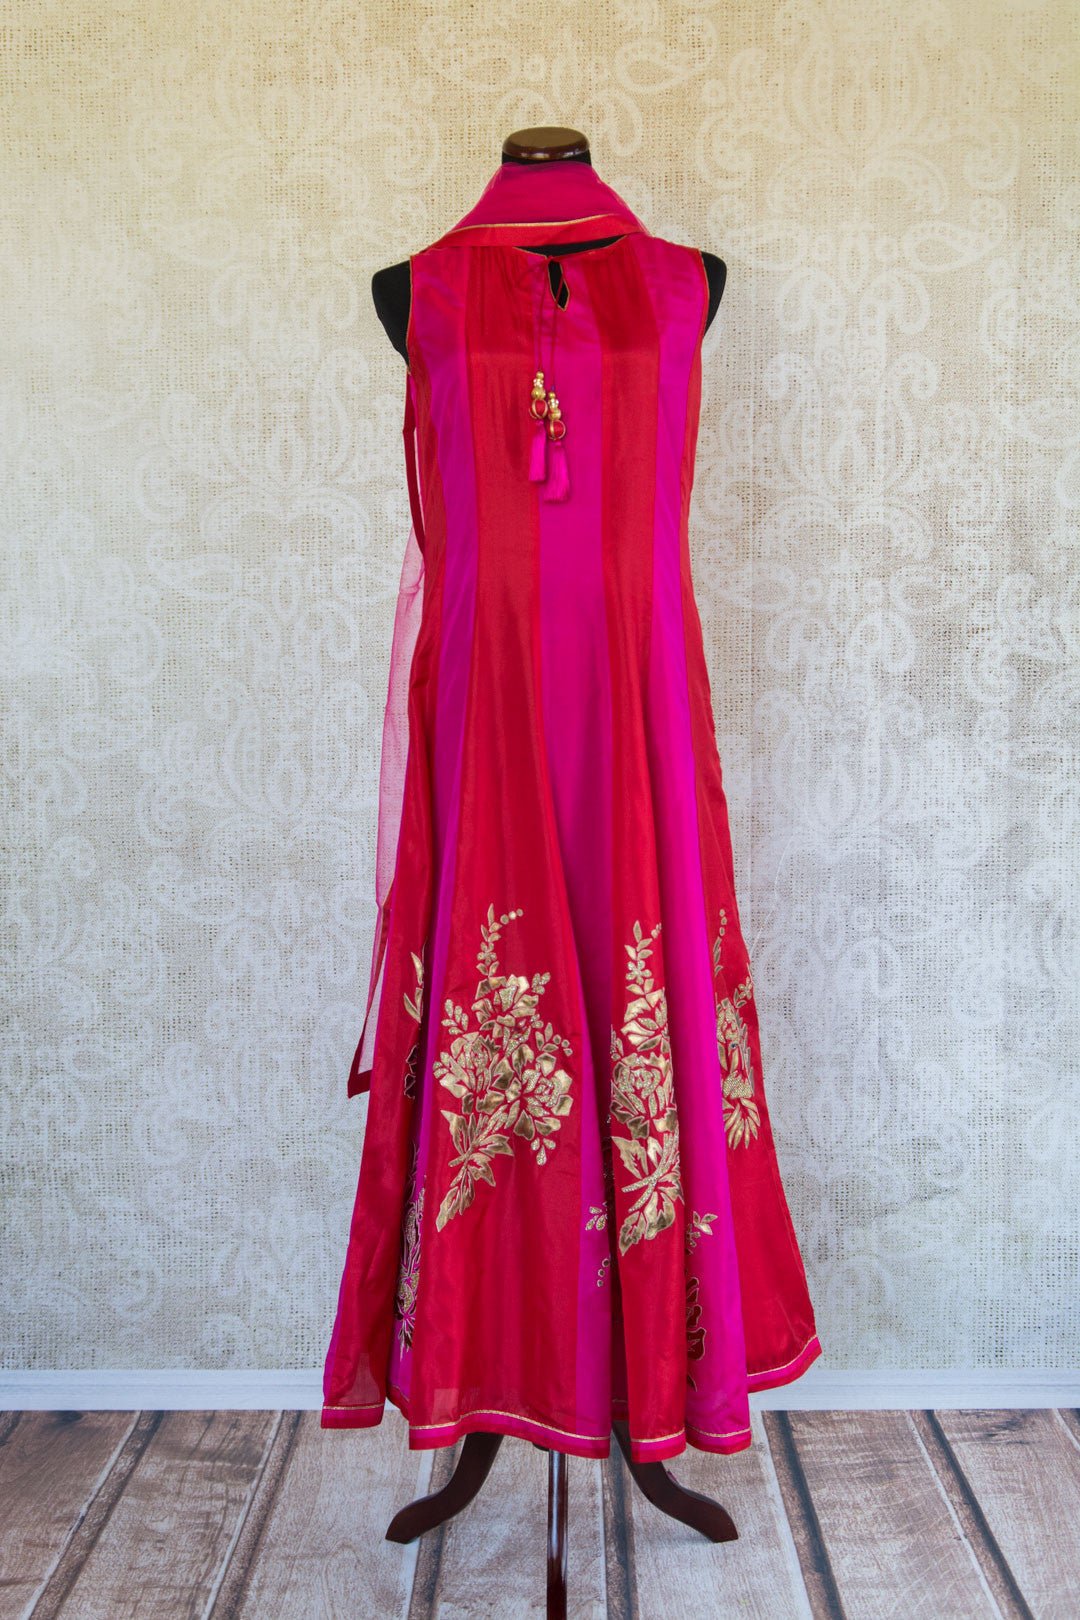 501089-suit-sleeveless-red-fuchsia-striped-suit-elegant-gold-embroidery-scarf